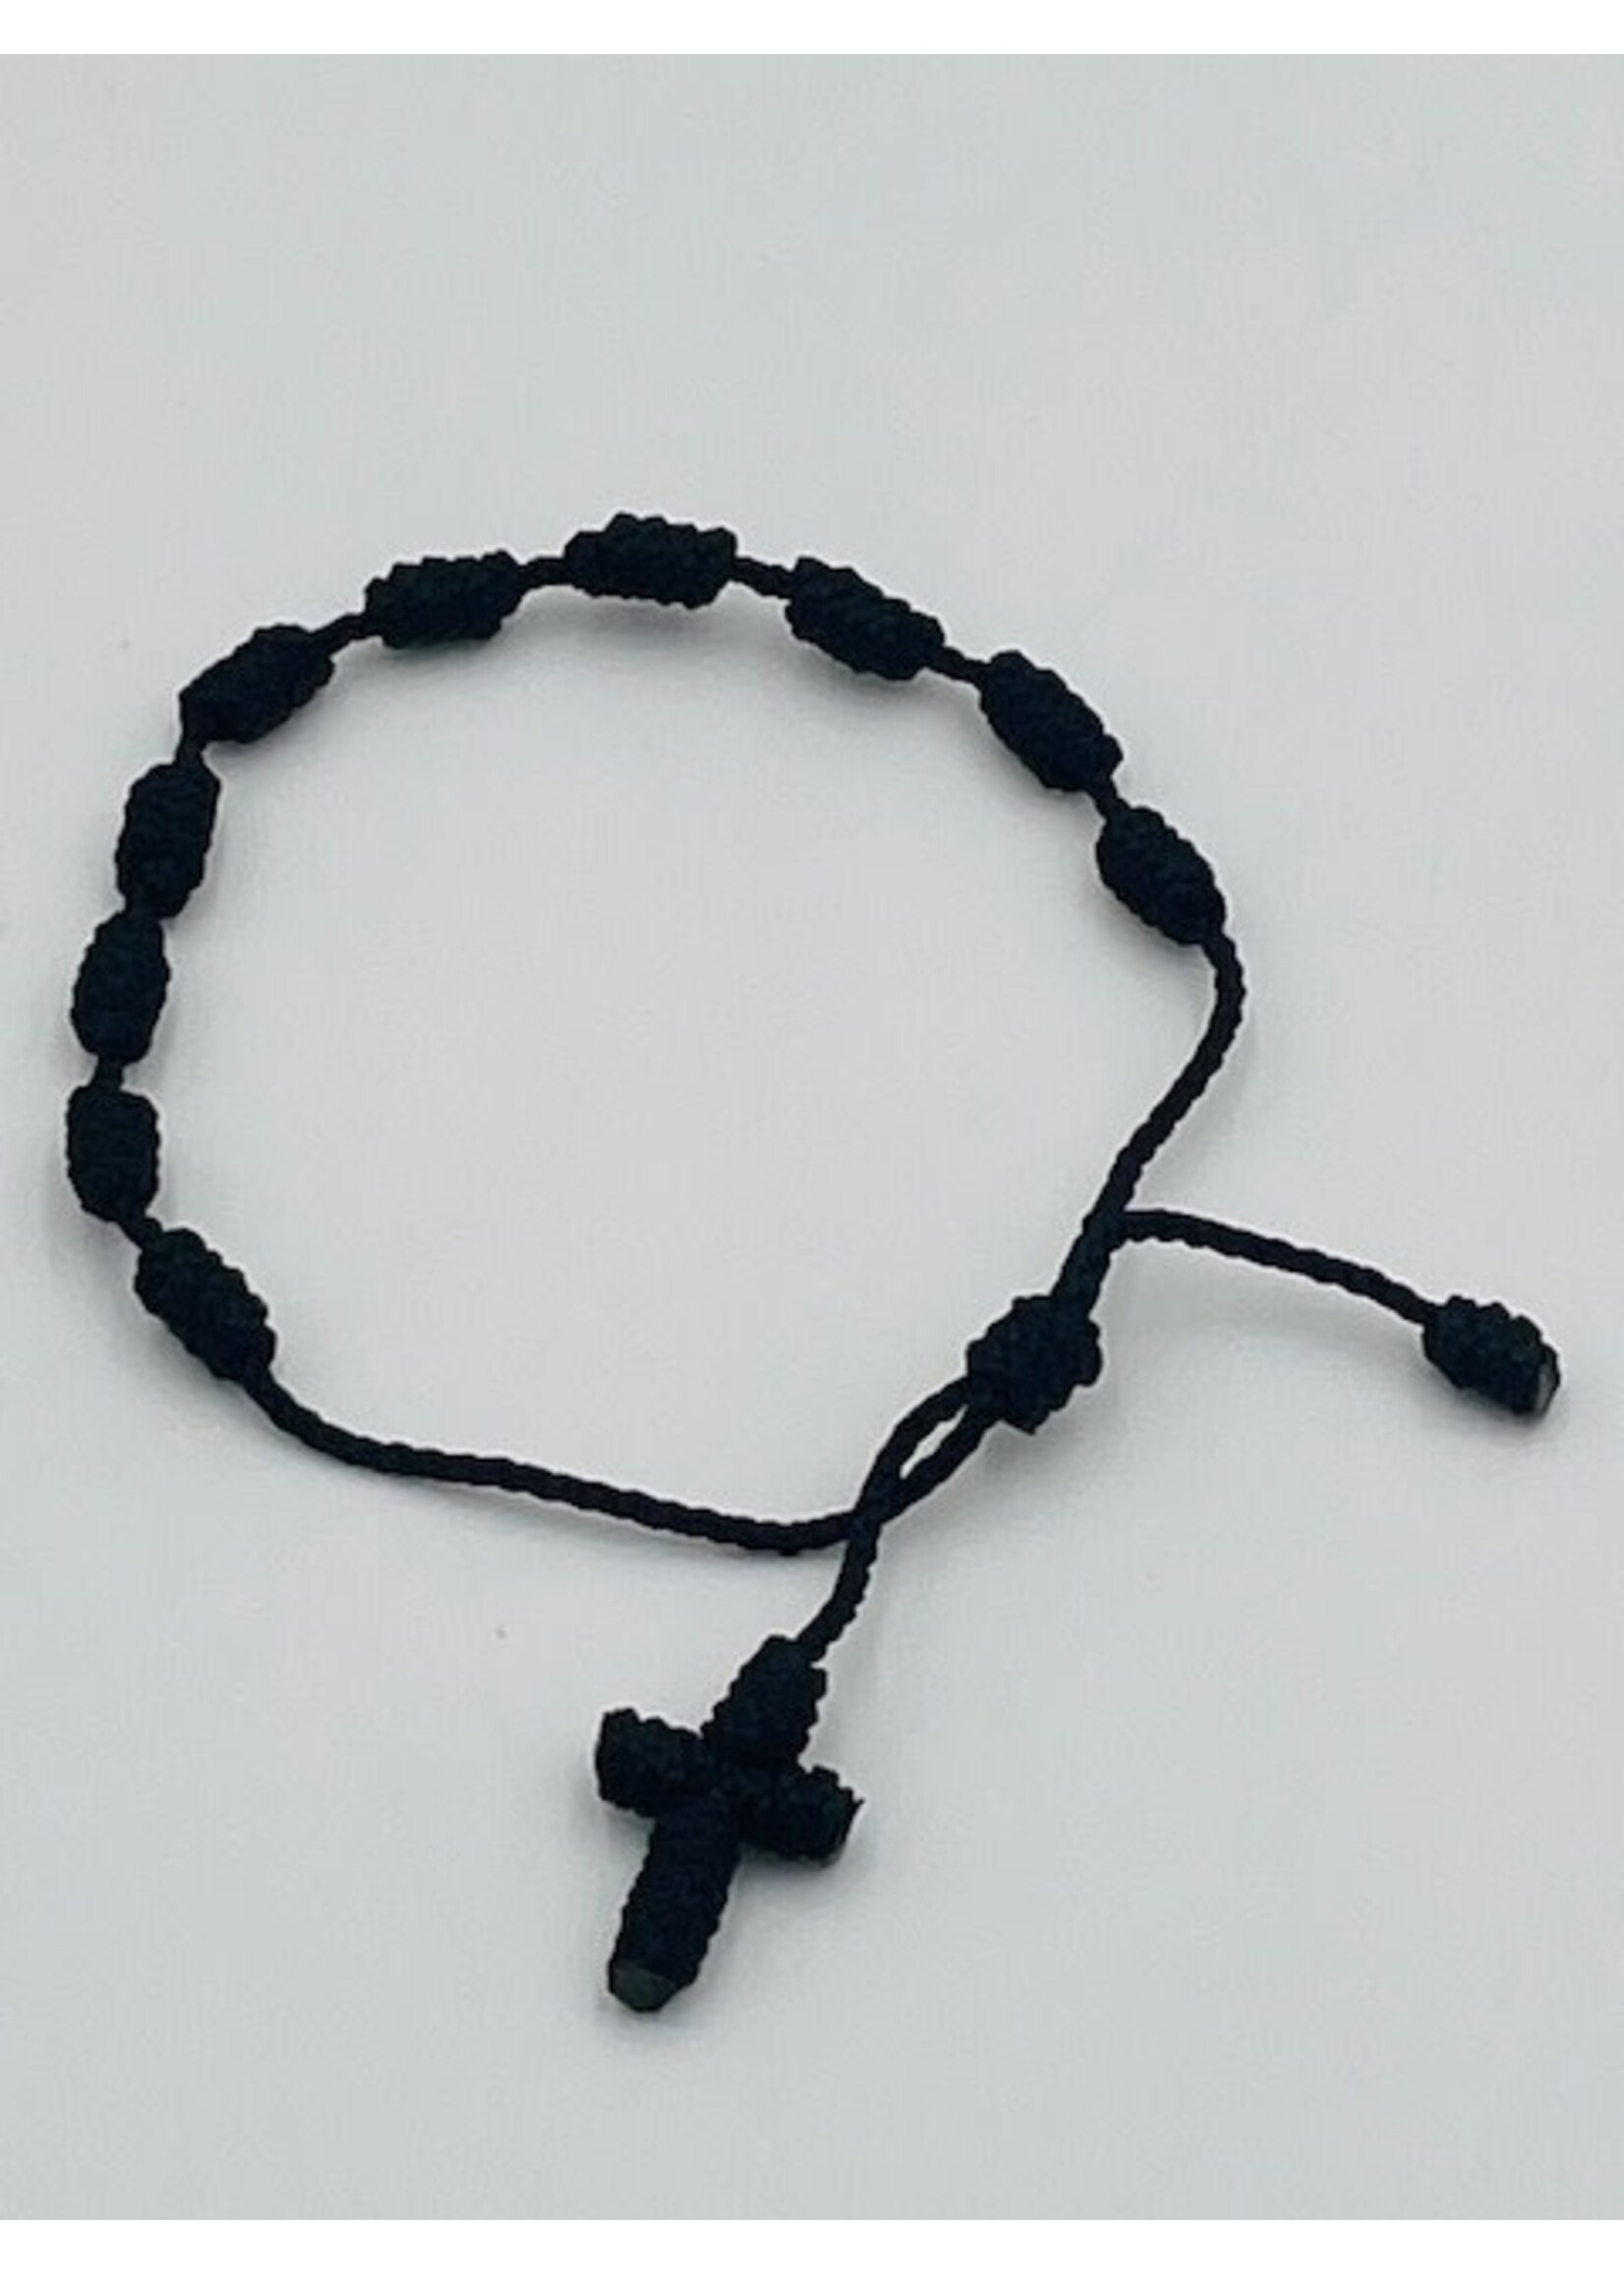 Corded Rosary Bracelet with Slipknot - assorted colors